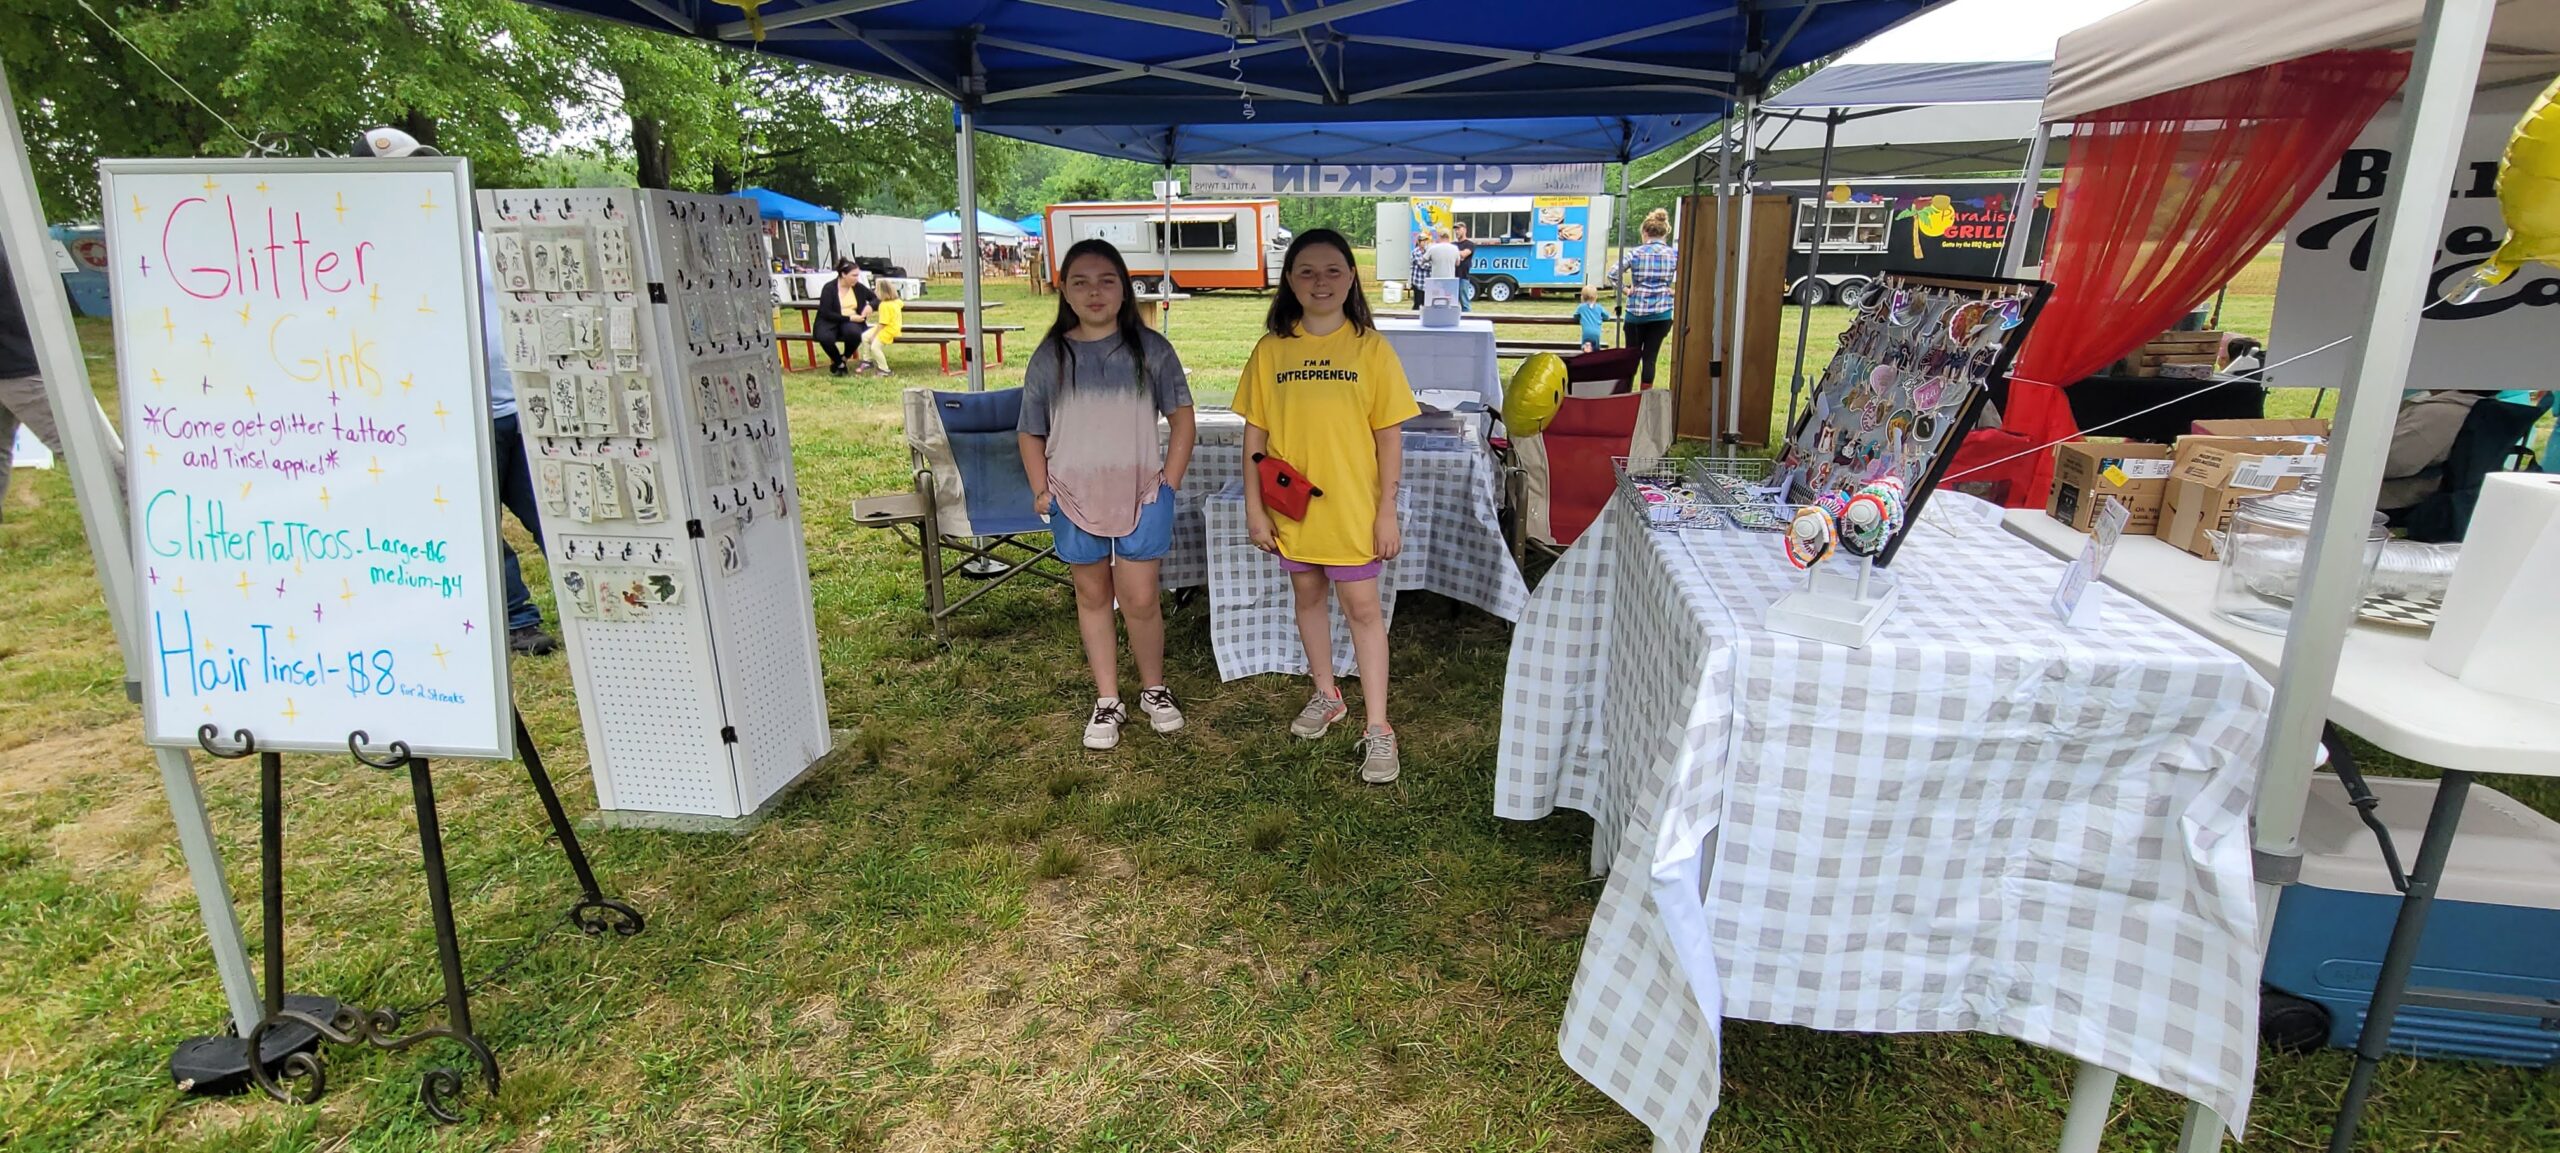 While at our Millington, TN market on May 6th, we got to meet the Glitter Girls! Sophia, 13 and Abby, 11, ran their booth with the 
help of their 4-year-old sister Gwen. This was their first market and they talked to, and hair tinseled, our Nashville manager, Amanda!